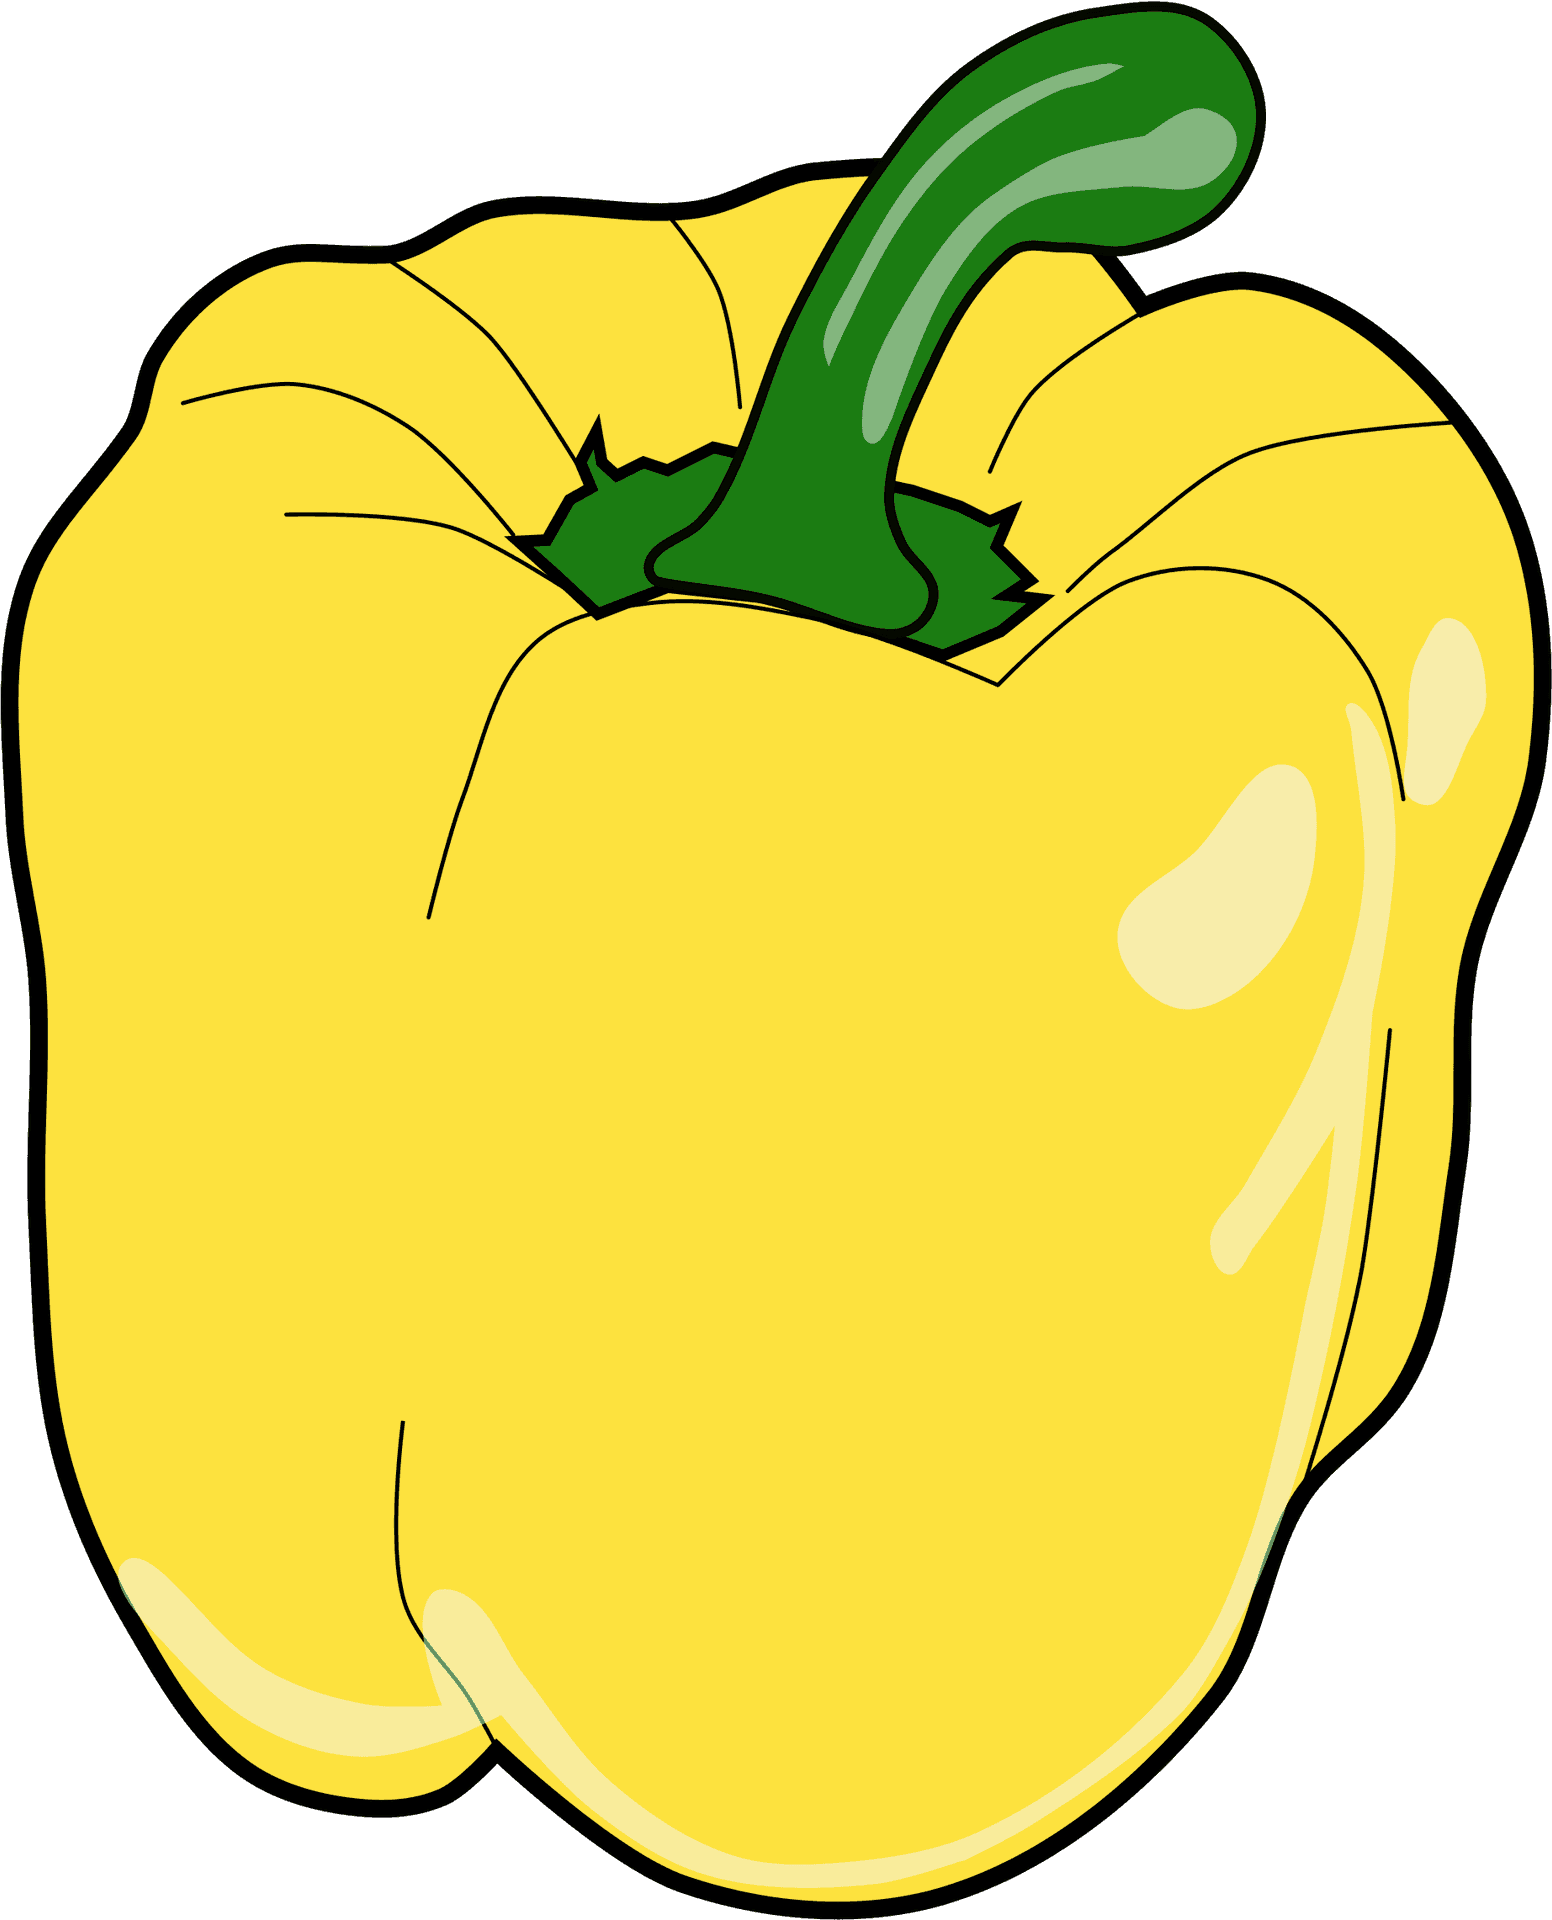 Yellow Bell Pepper Illustration PNG